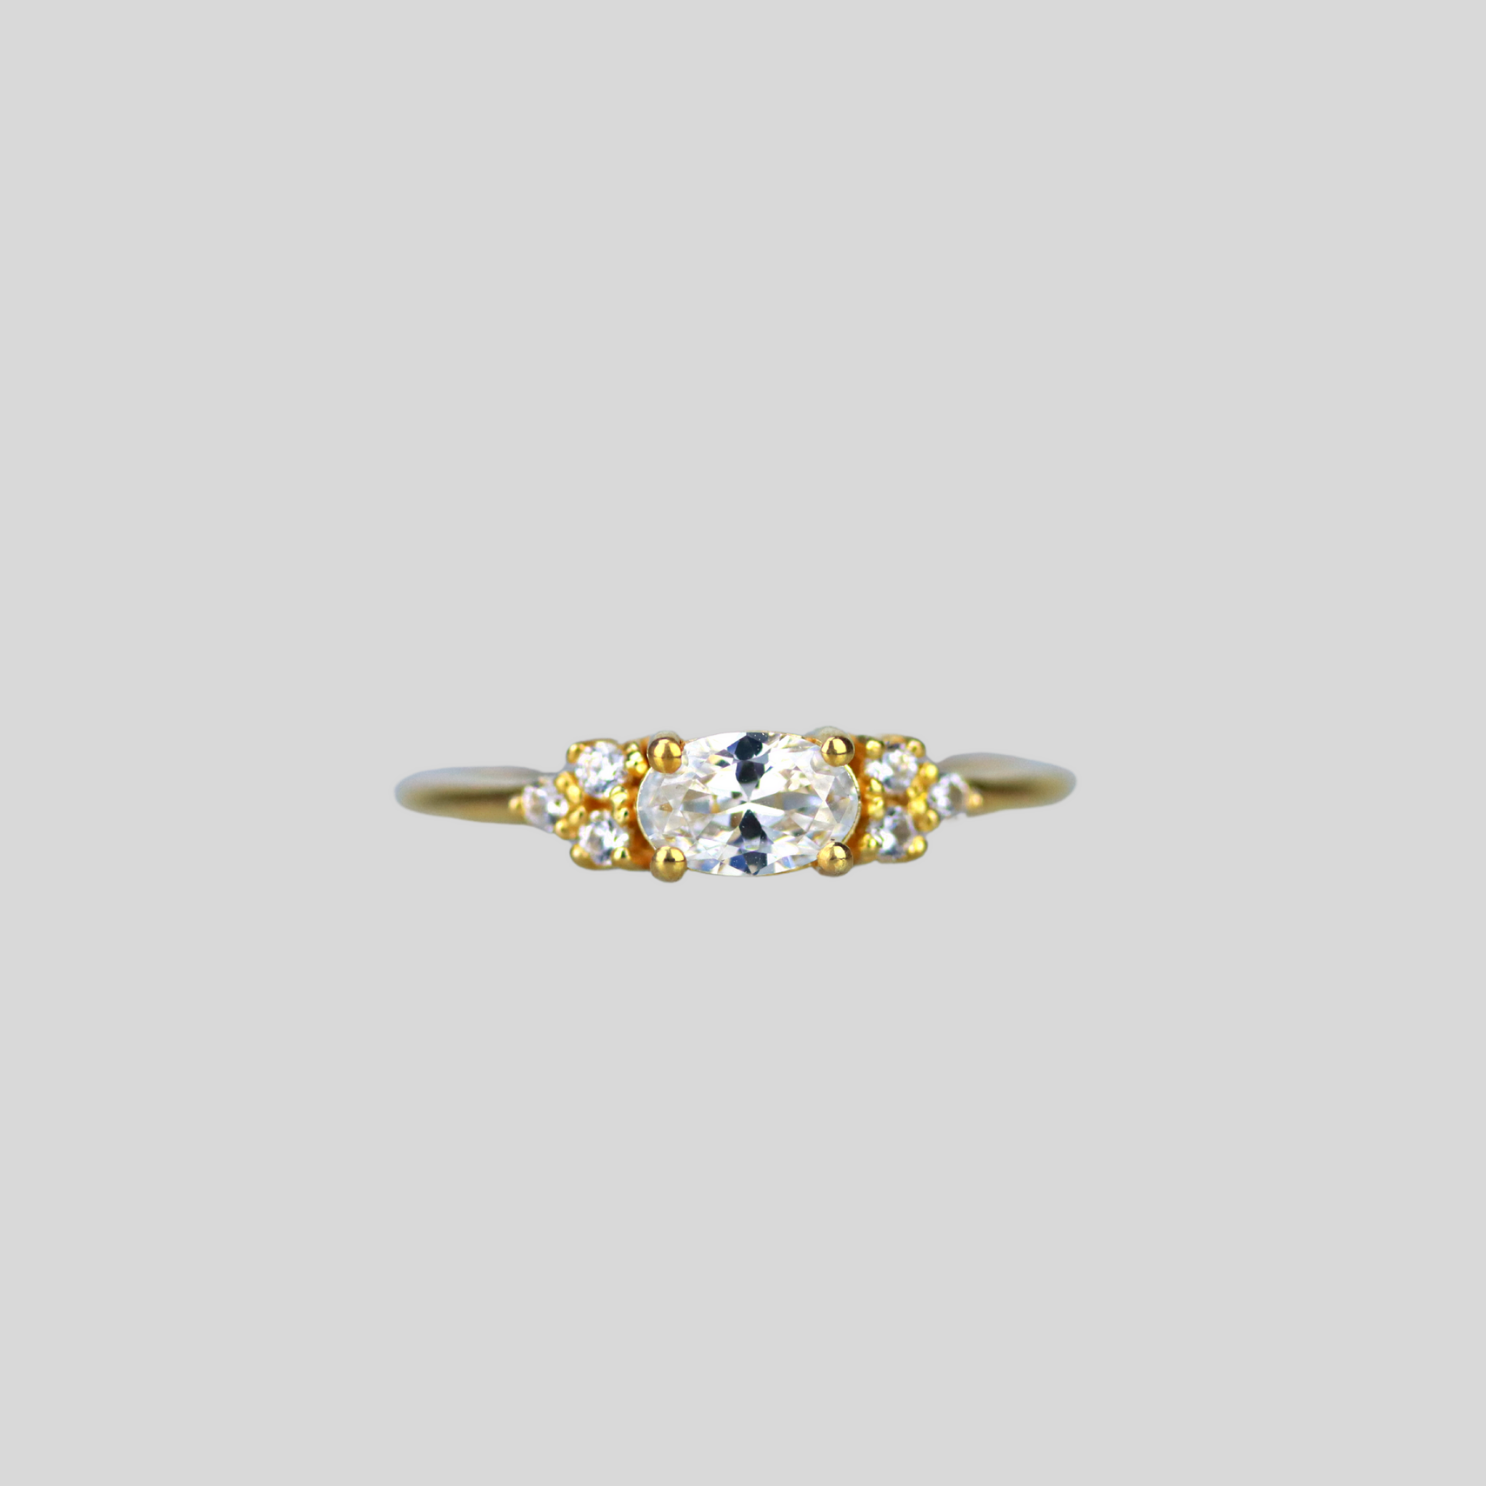 Solid 14k gold east-west oval cz ring